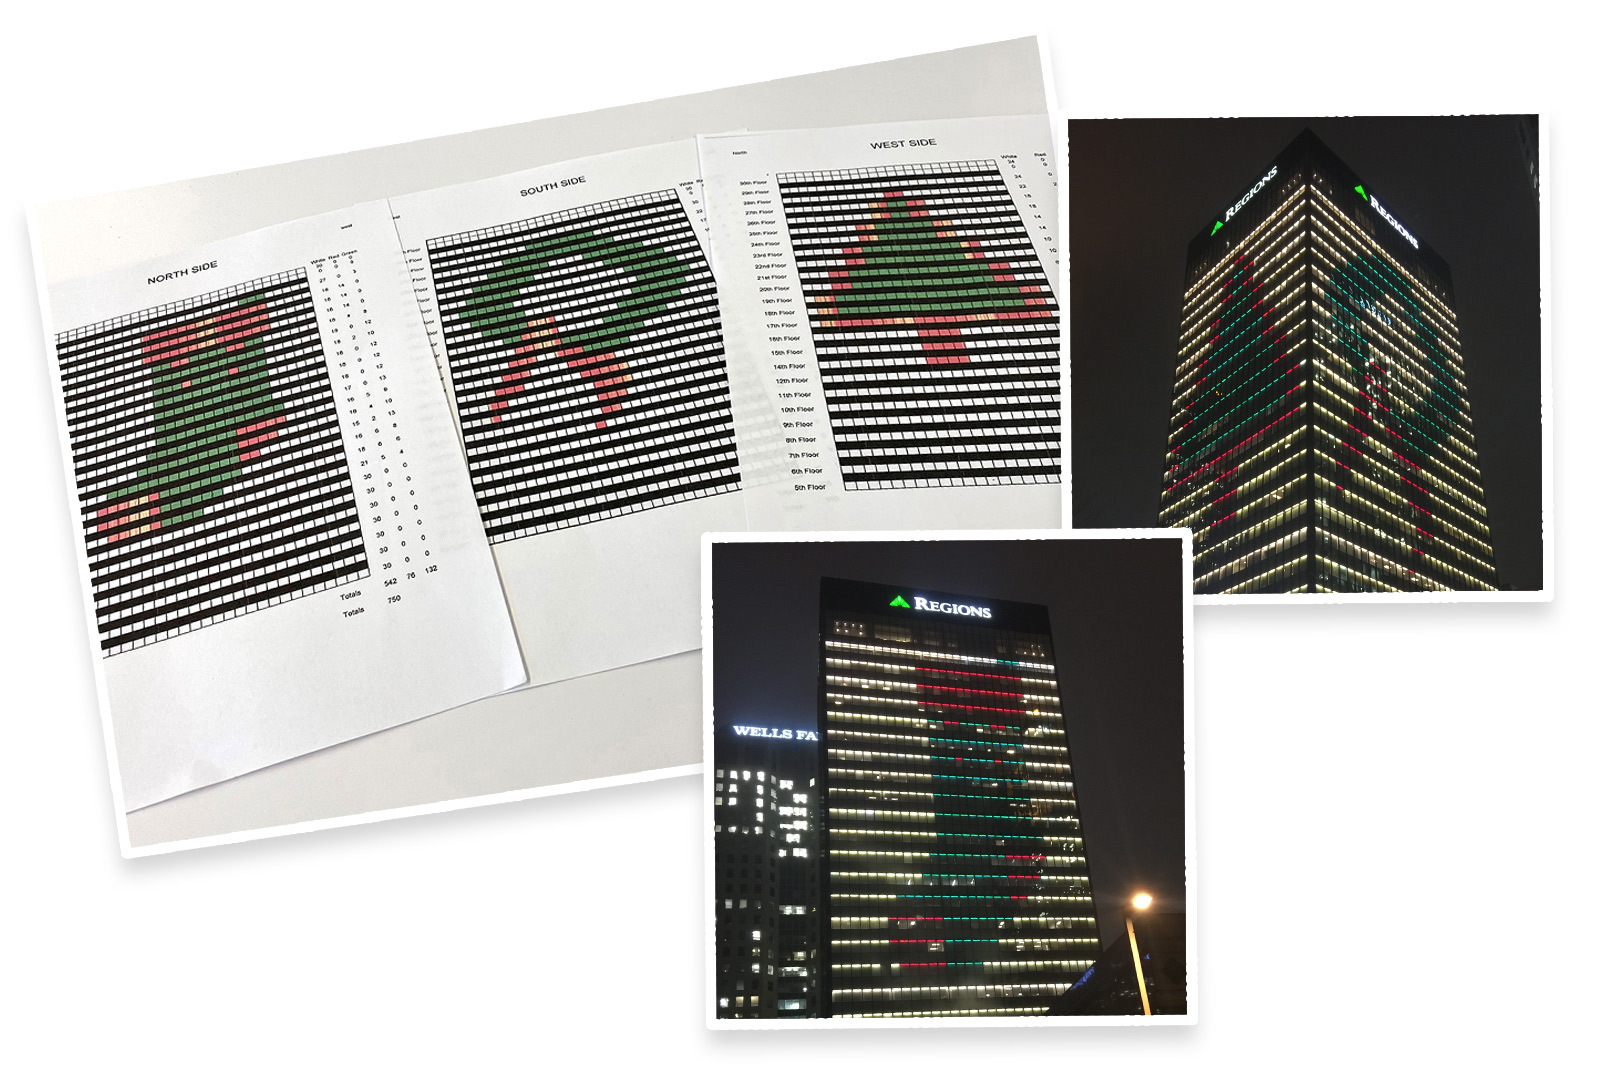 photos of papers showing the lighting diagrams as well as photos of each side of the lighted building. images are in the shape of a Stocking, wreath, and Christmas tree